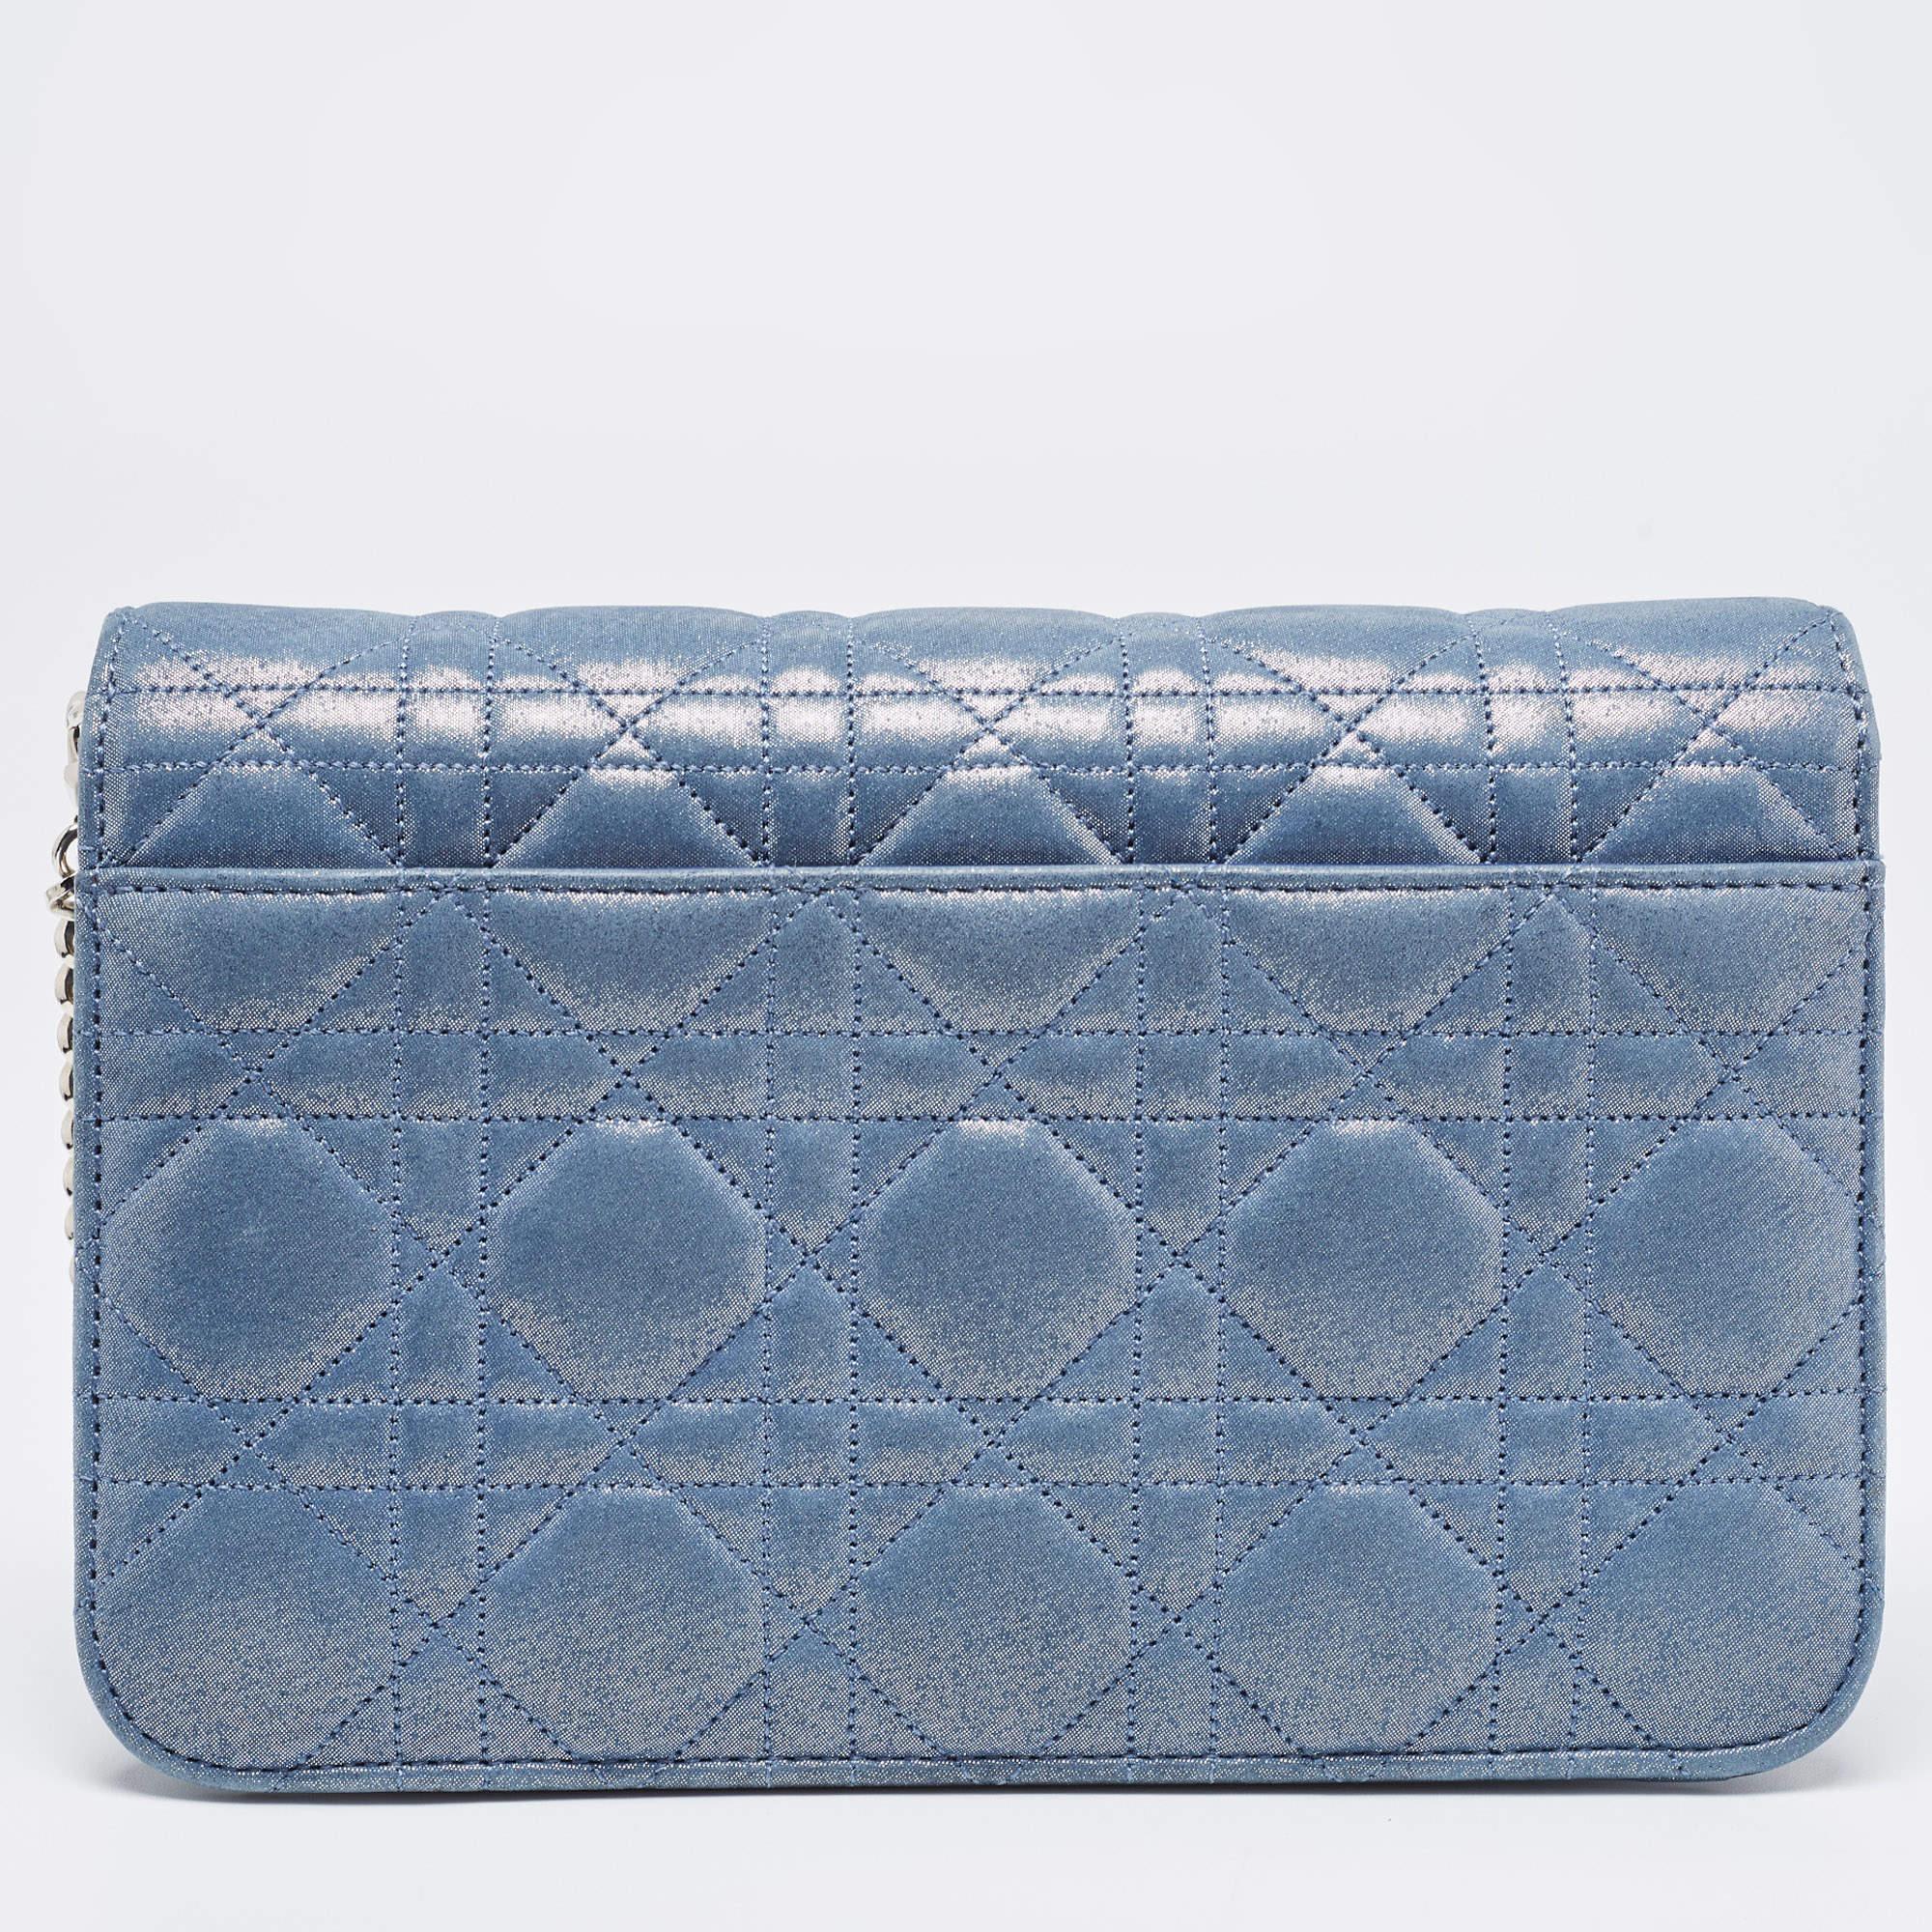 This creation from Dior is so pretty it will surely make a fine buy. Crafted from leather, this Miss Dior Promenade clutch features their signature Cannage quilt all over. The front flap has a Dior lock that opens to a leather-nylon lined interior